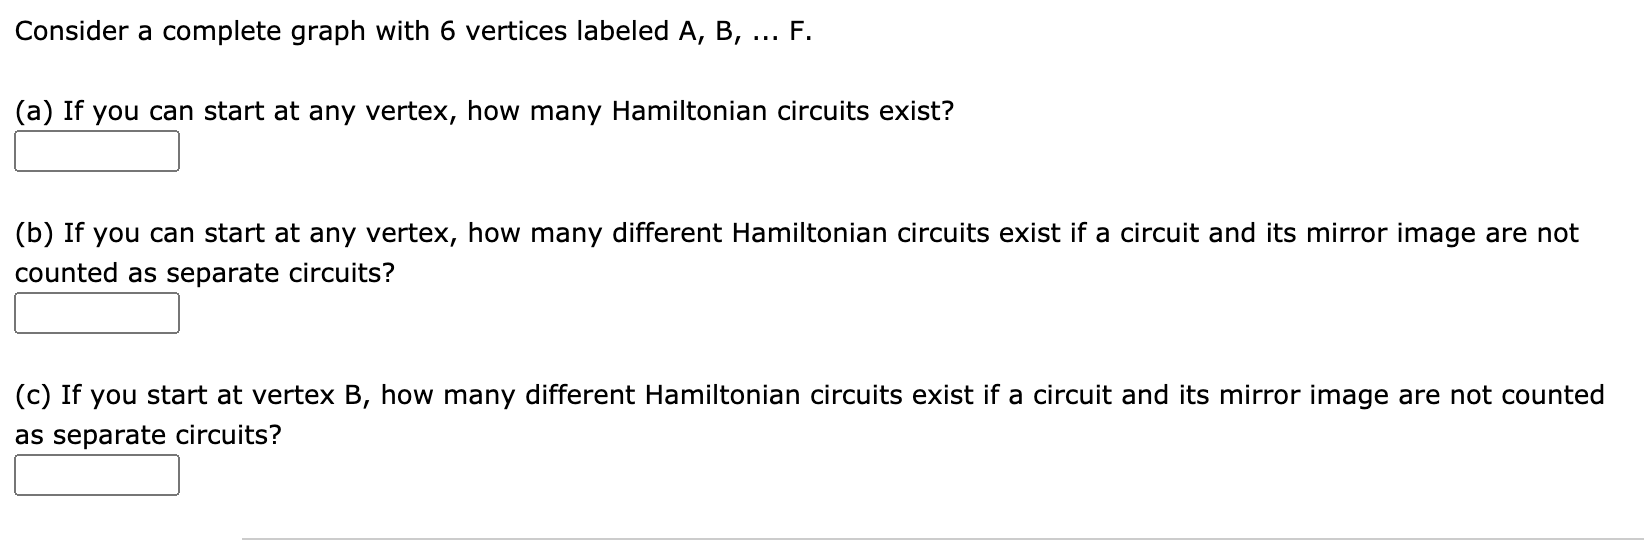 Consider a complete graph with 6 vertices labeled A, B,
F.
(a) If you can start at any vertex, how many Hamiltonian circuits exist?
(b) If you can start at any vertex, how many different Hamiltonian circuits exist if a circuit and its mirror image are not
counted as separate circuits?
(c) If you start at vertex B, how many different Hamiltonian circuits exist if a circuit and its mirror image are not counted
as separate circuits?
